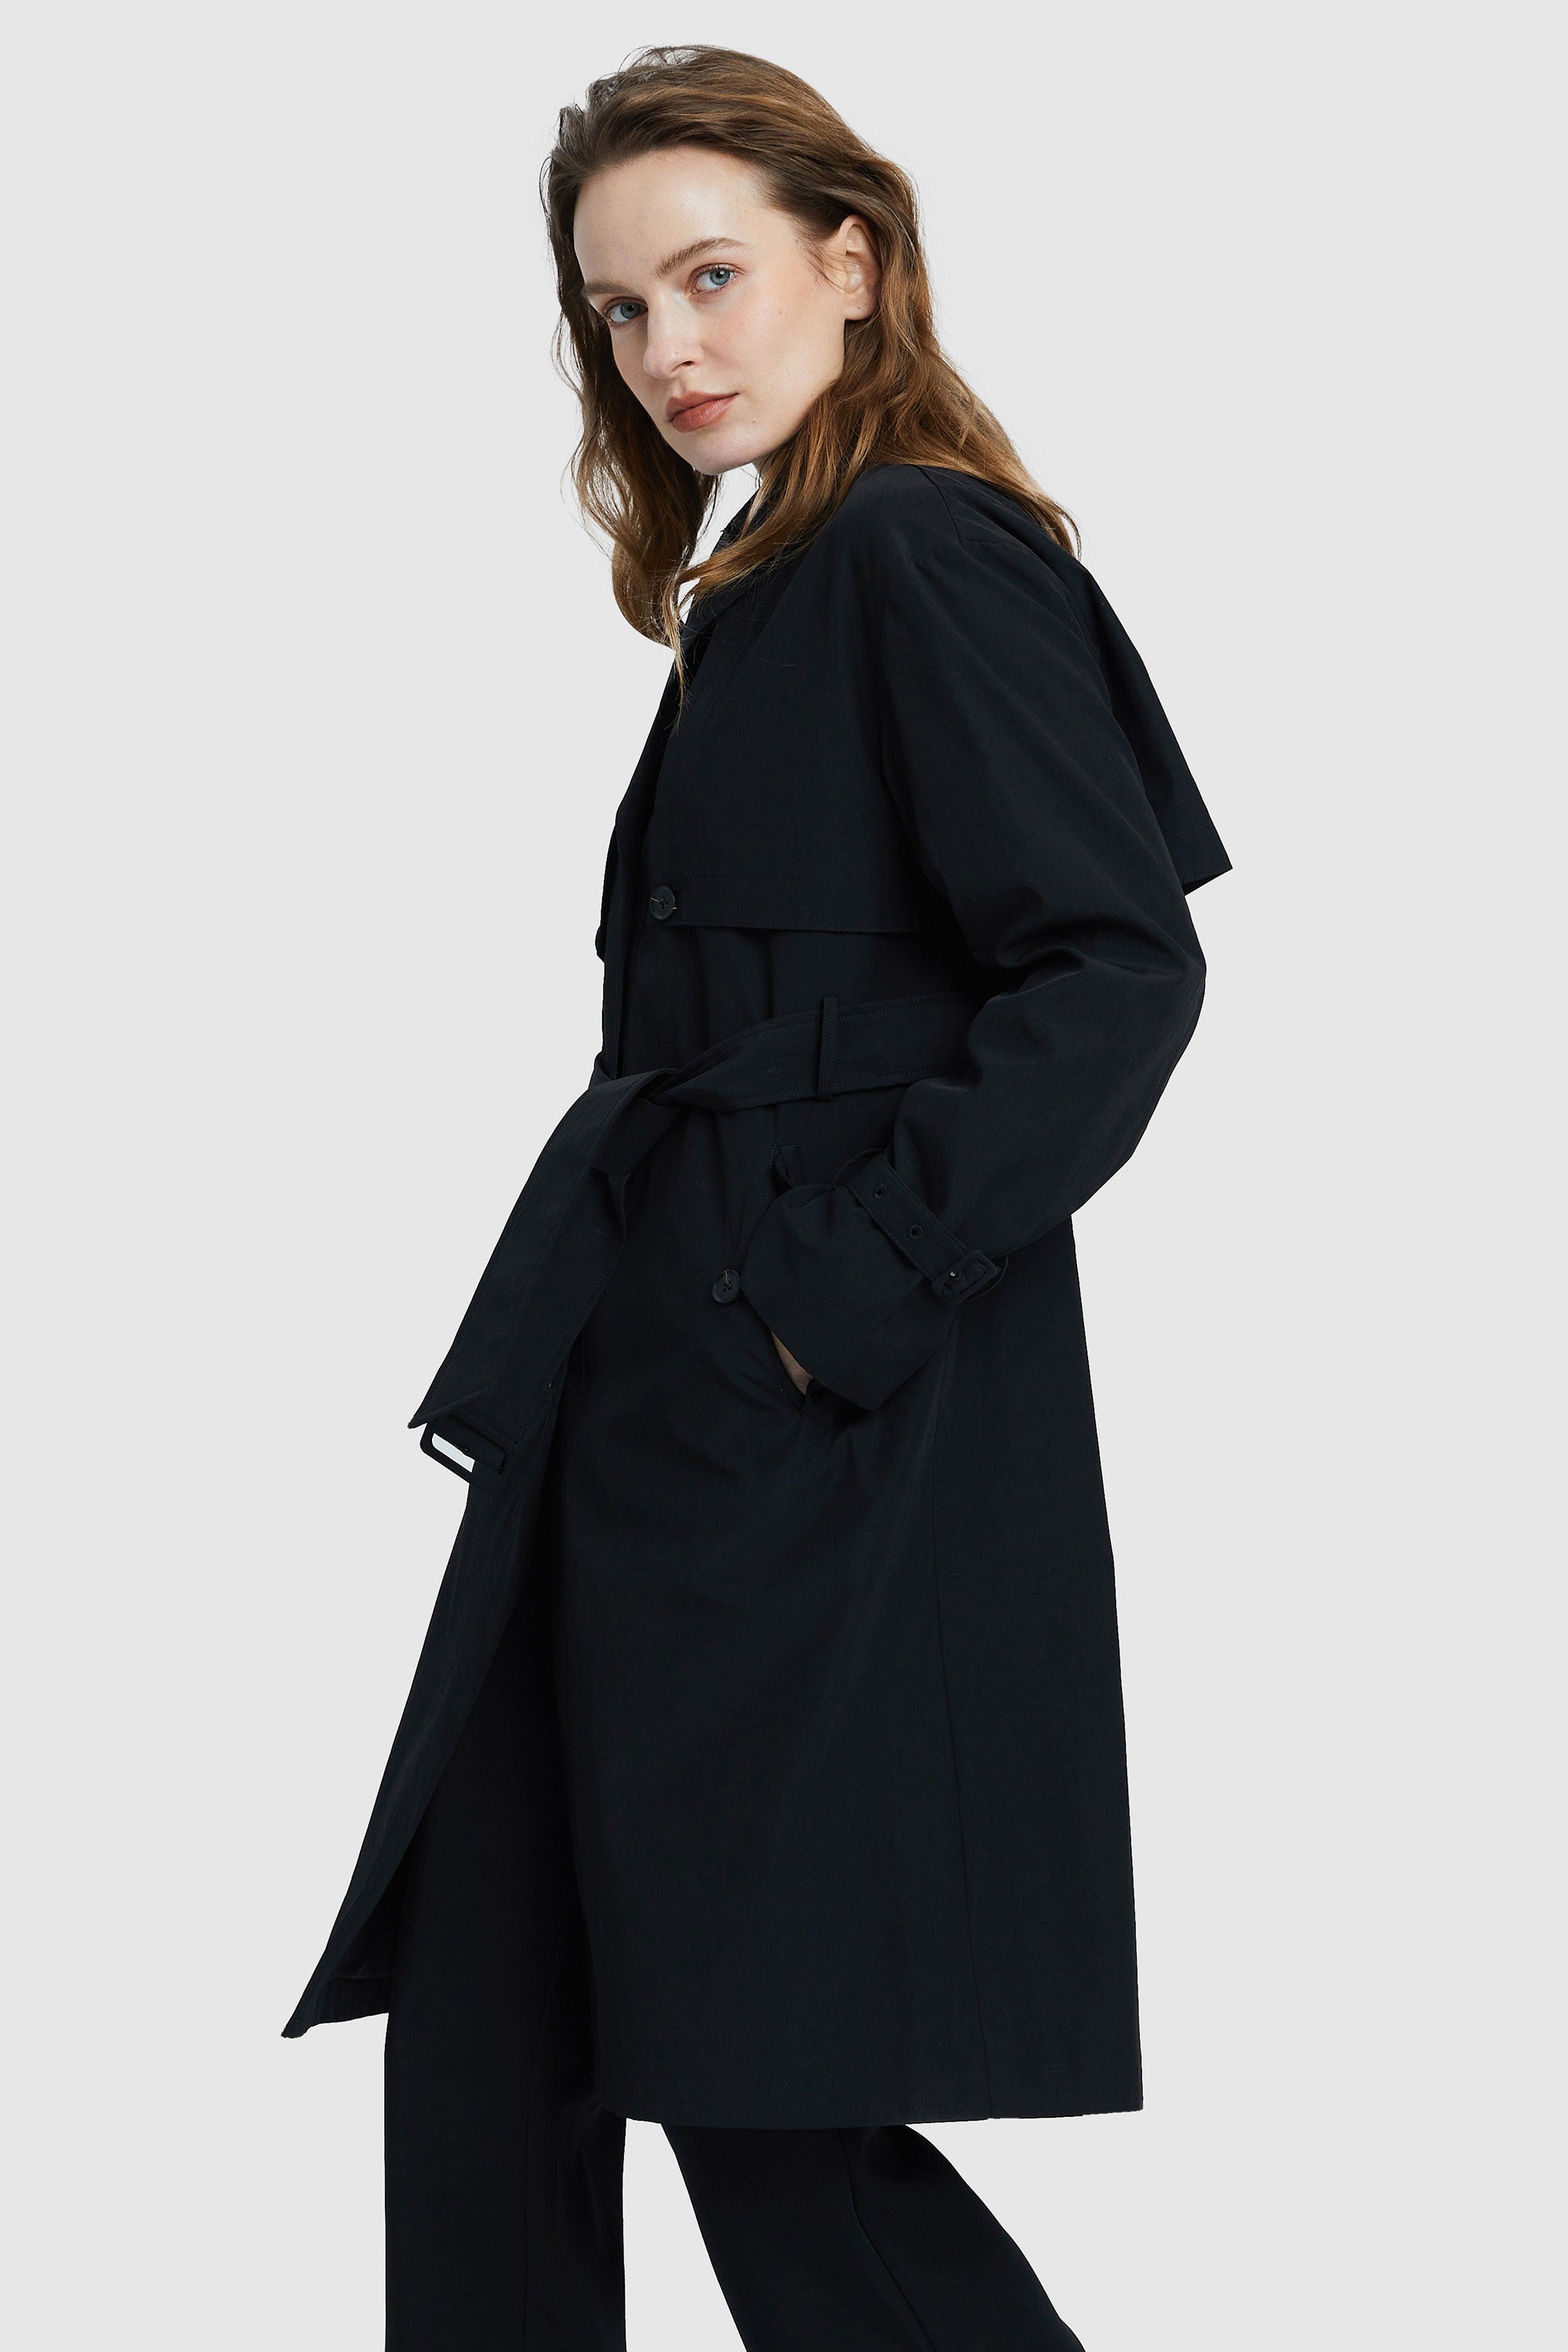 Orolay Women's Long Single Breasted Trench Coat with Belt